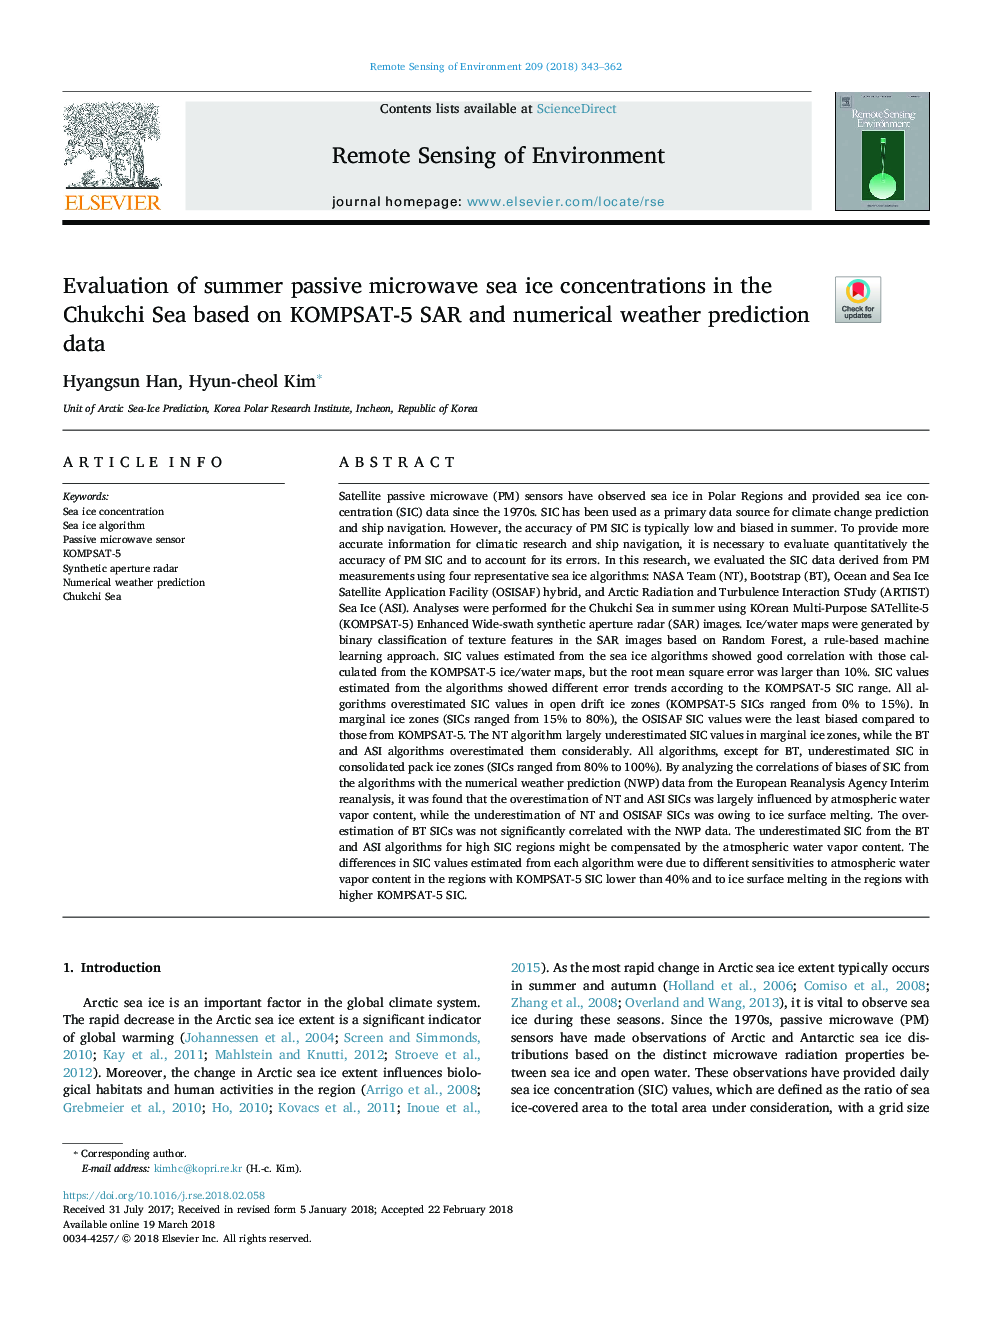 Evaluation of summer passive microwave sea ice concentrations in the Chukchi Sea based on KOMPSAT-5 SAR and numerical weather prediction data